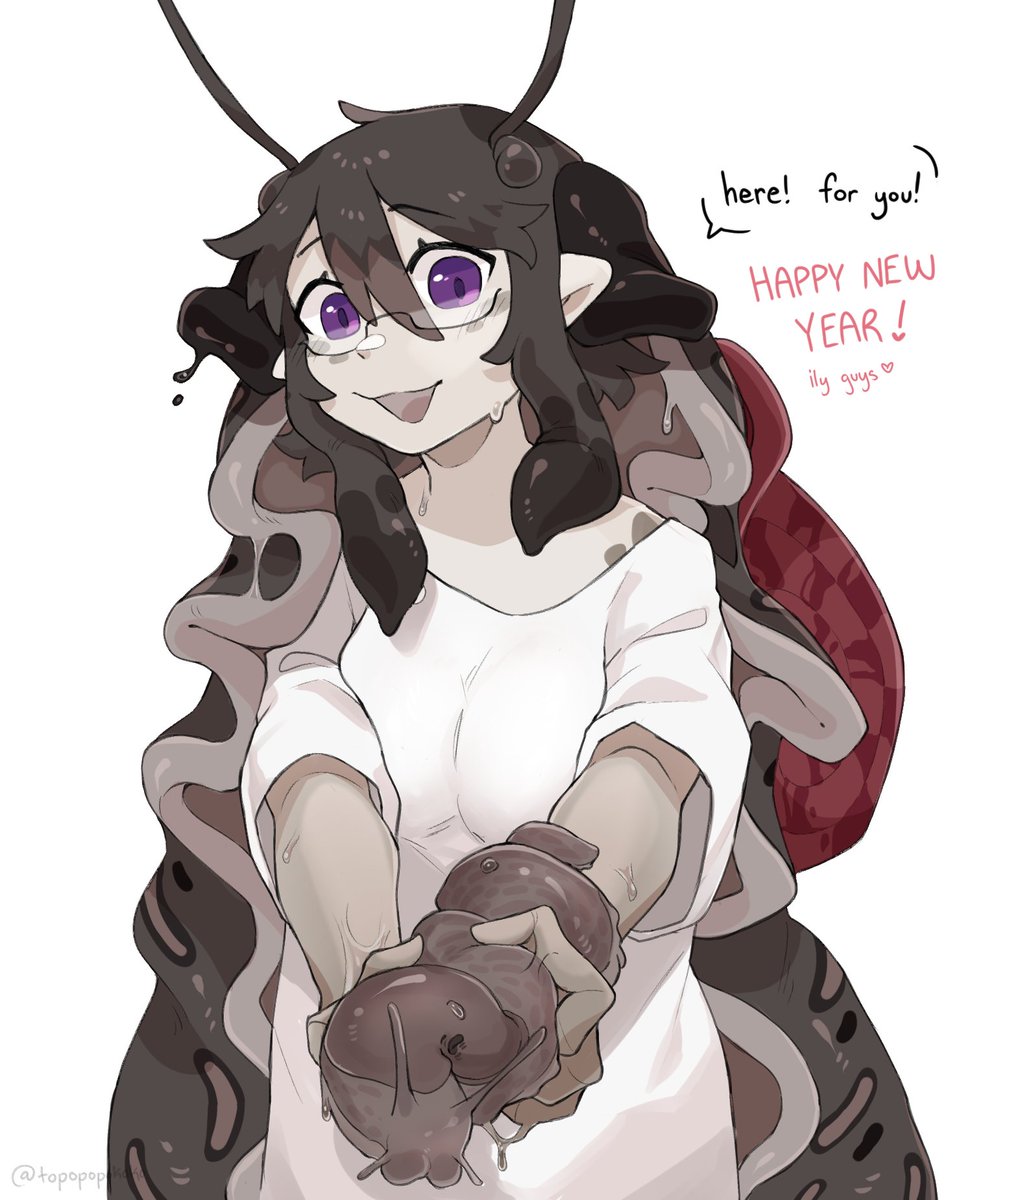 「have a good luck slug! for the new year!」|Char/Topo 🌿COMM CLOSED🌿のイラスト